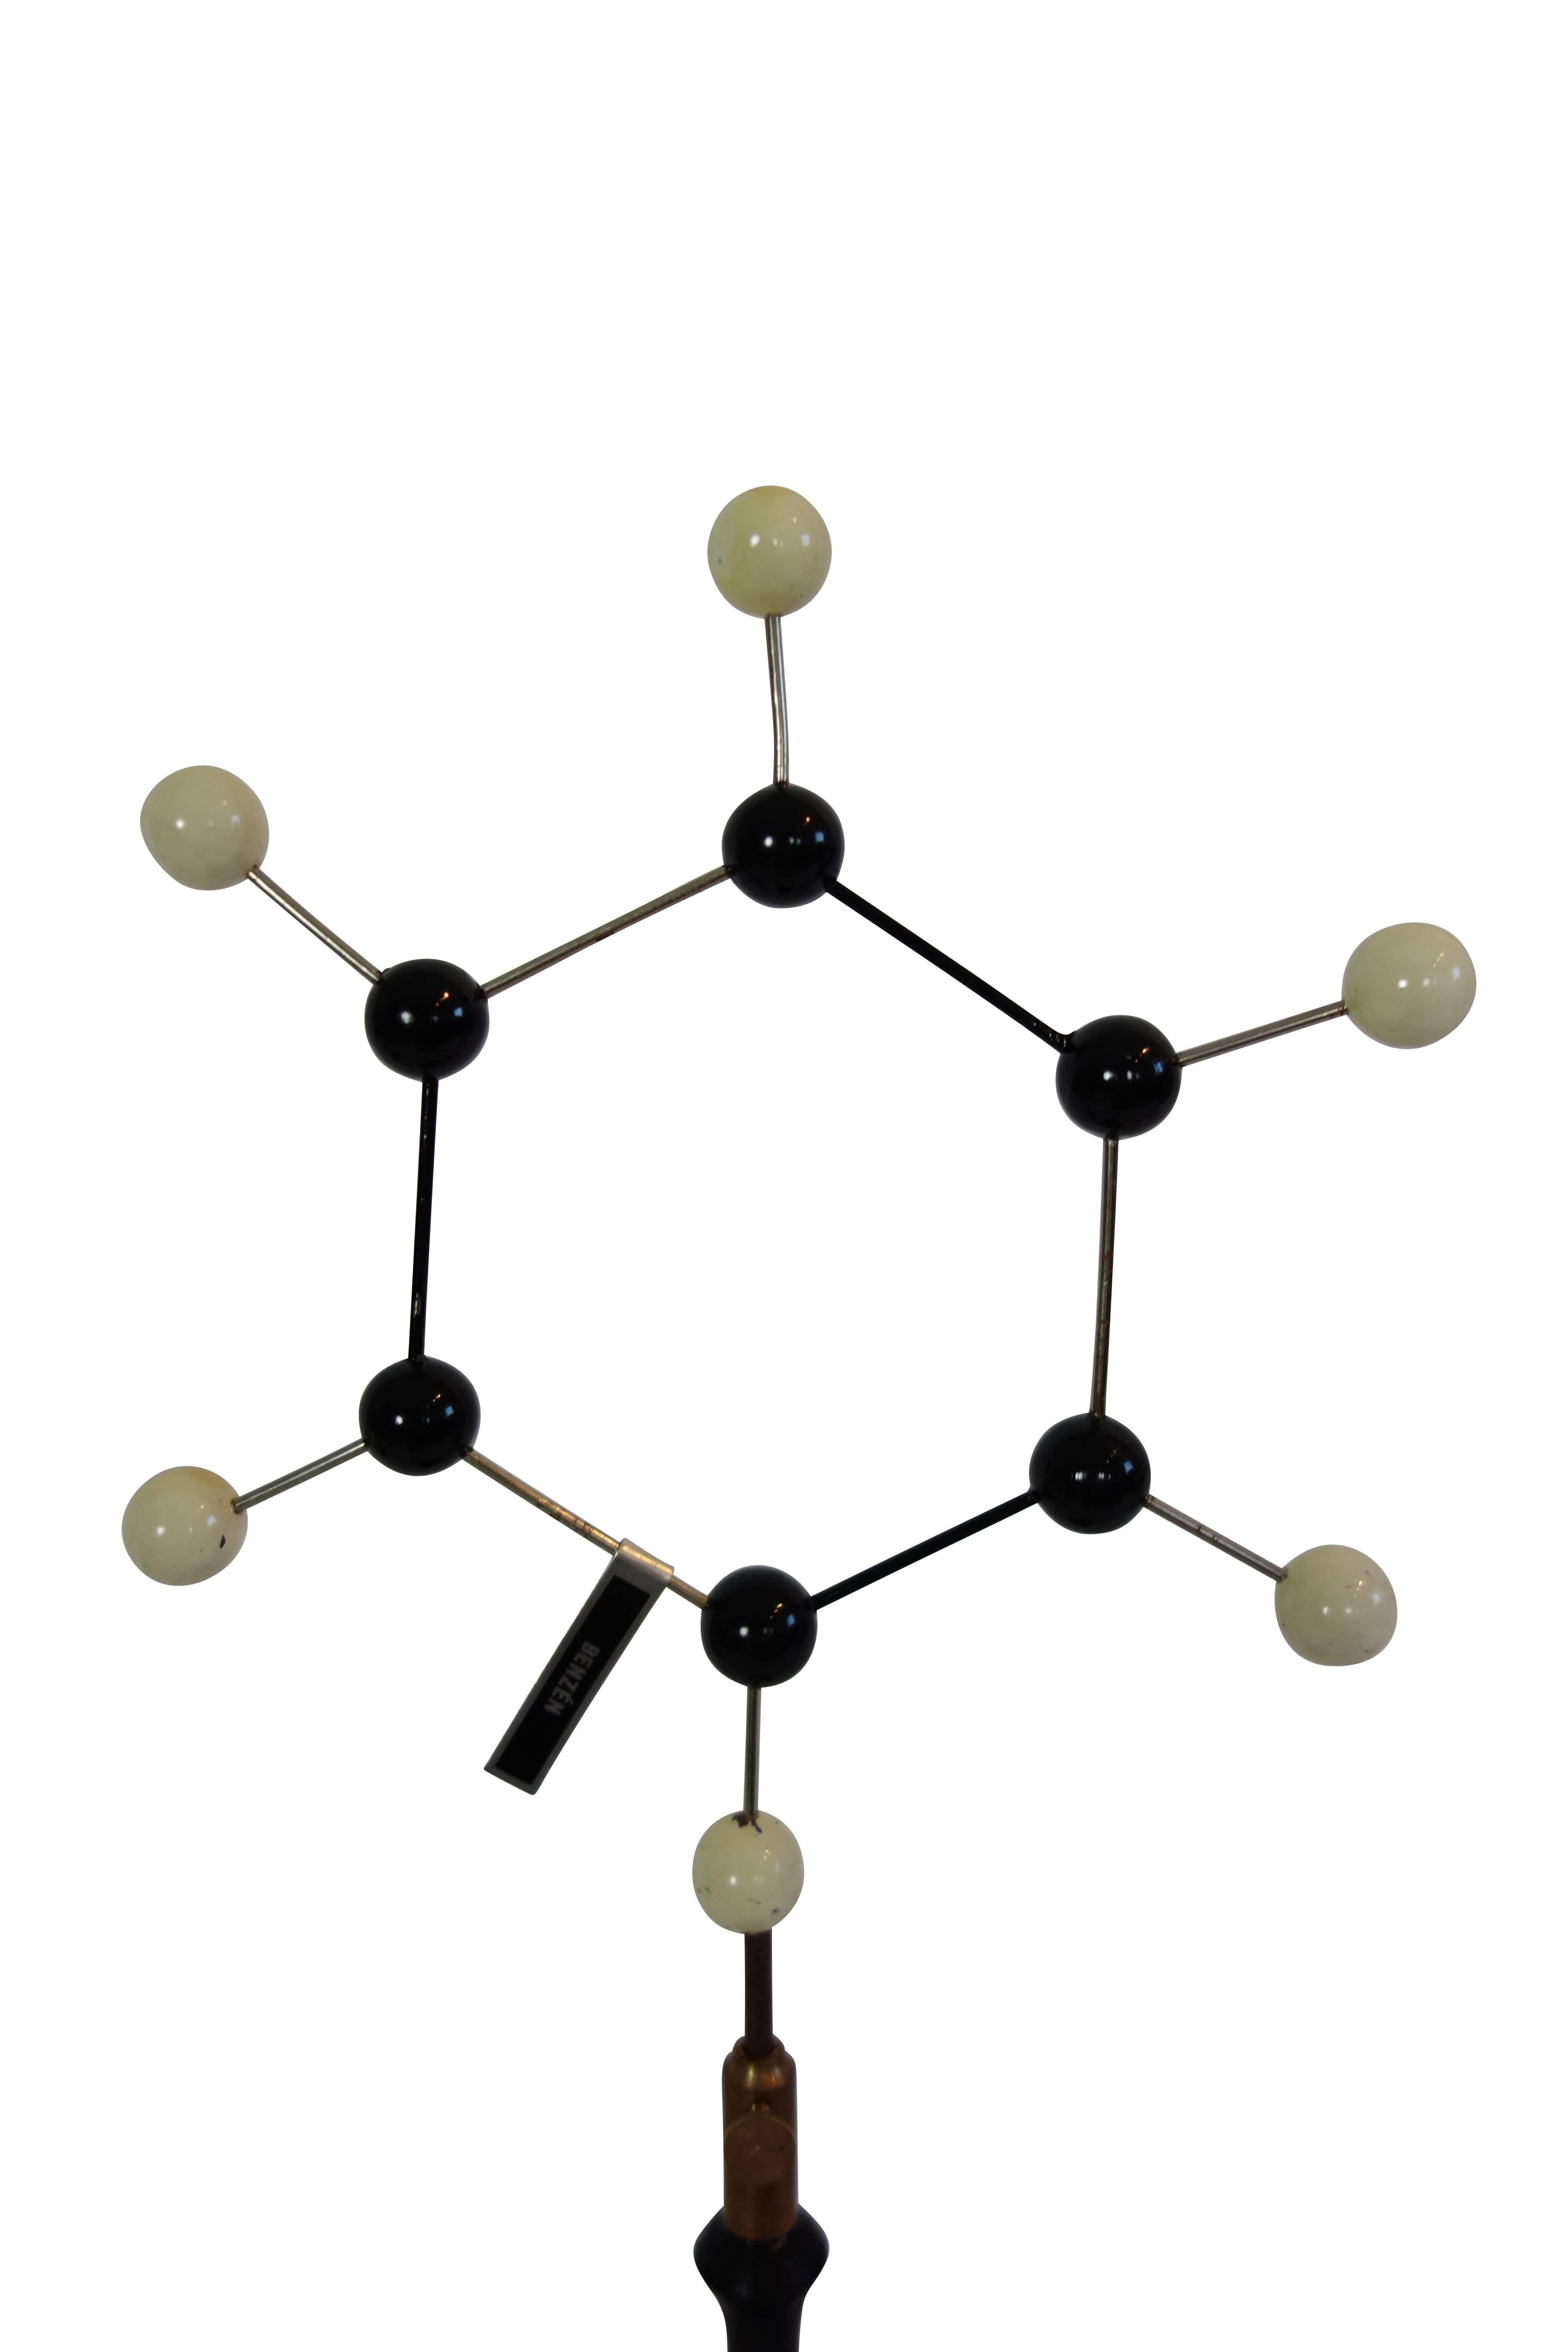 This is a 1950s molecular structure of Benzene from France labeled 'Benzén' and mounted to a wood stand.